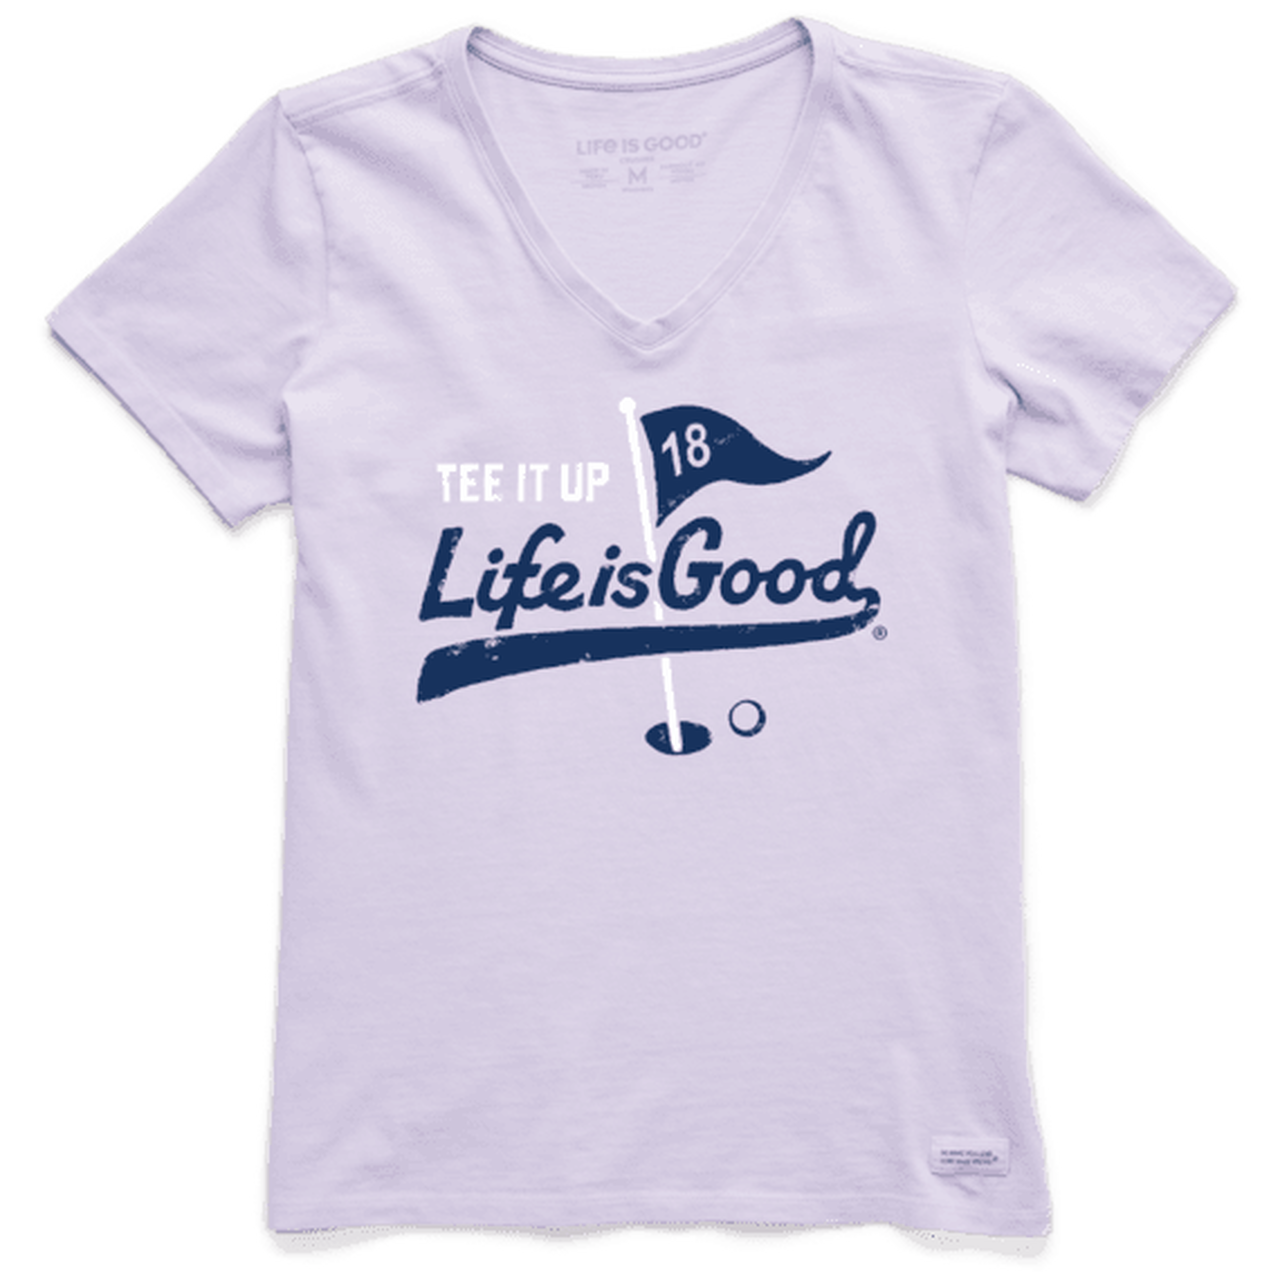 New Life is Good Tee it Up T-shirt